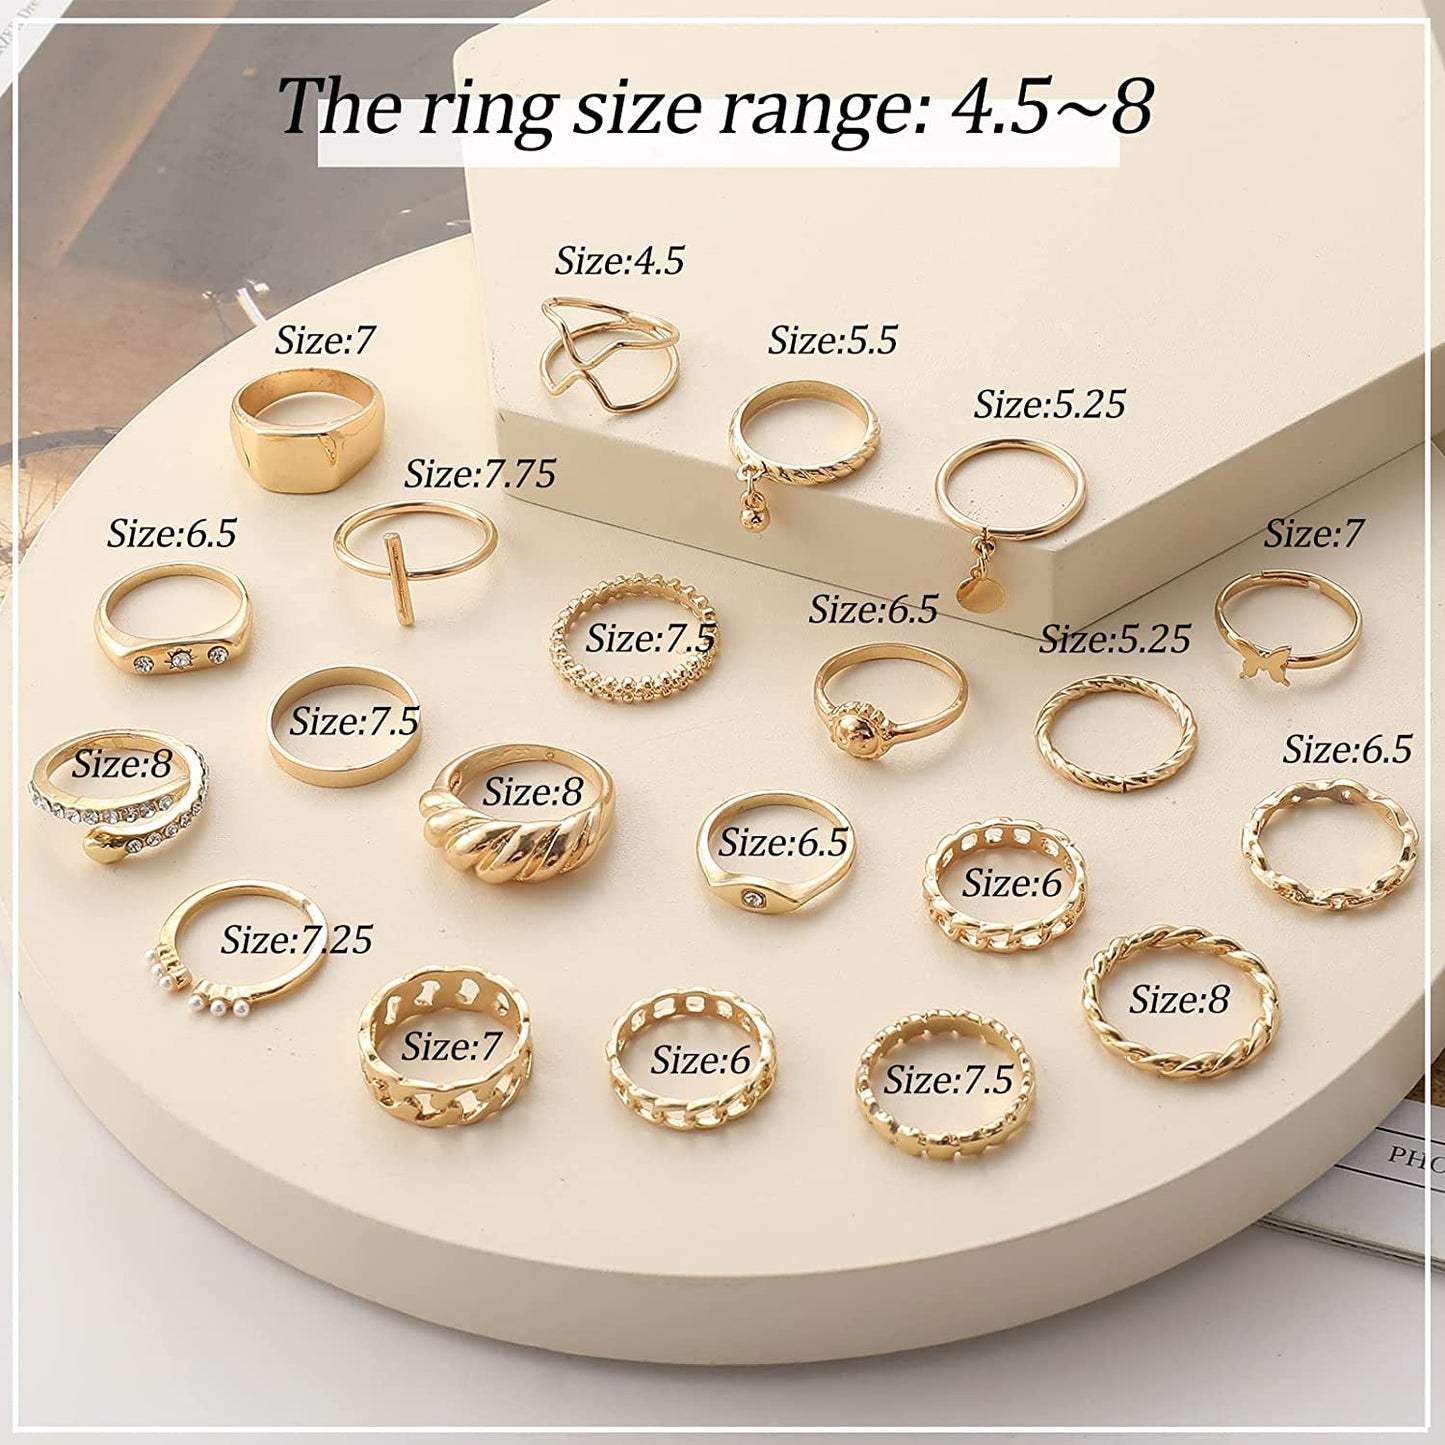 68 Pcs Gold Knuckle Rings Set for Women Girls, Stackable Rings Boho Joint Finger Midi Rings Silver Hollow Carved Crystal Stacking Rings Pack for Gift